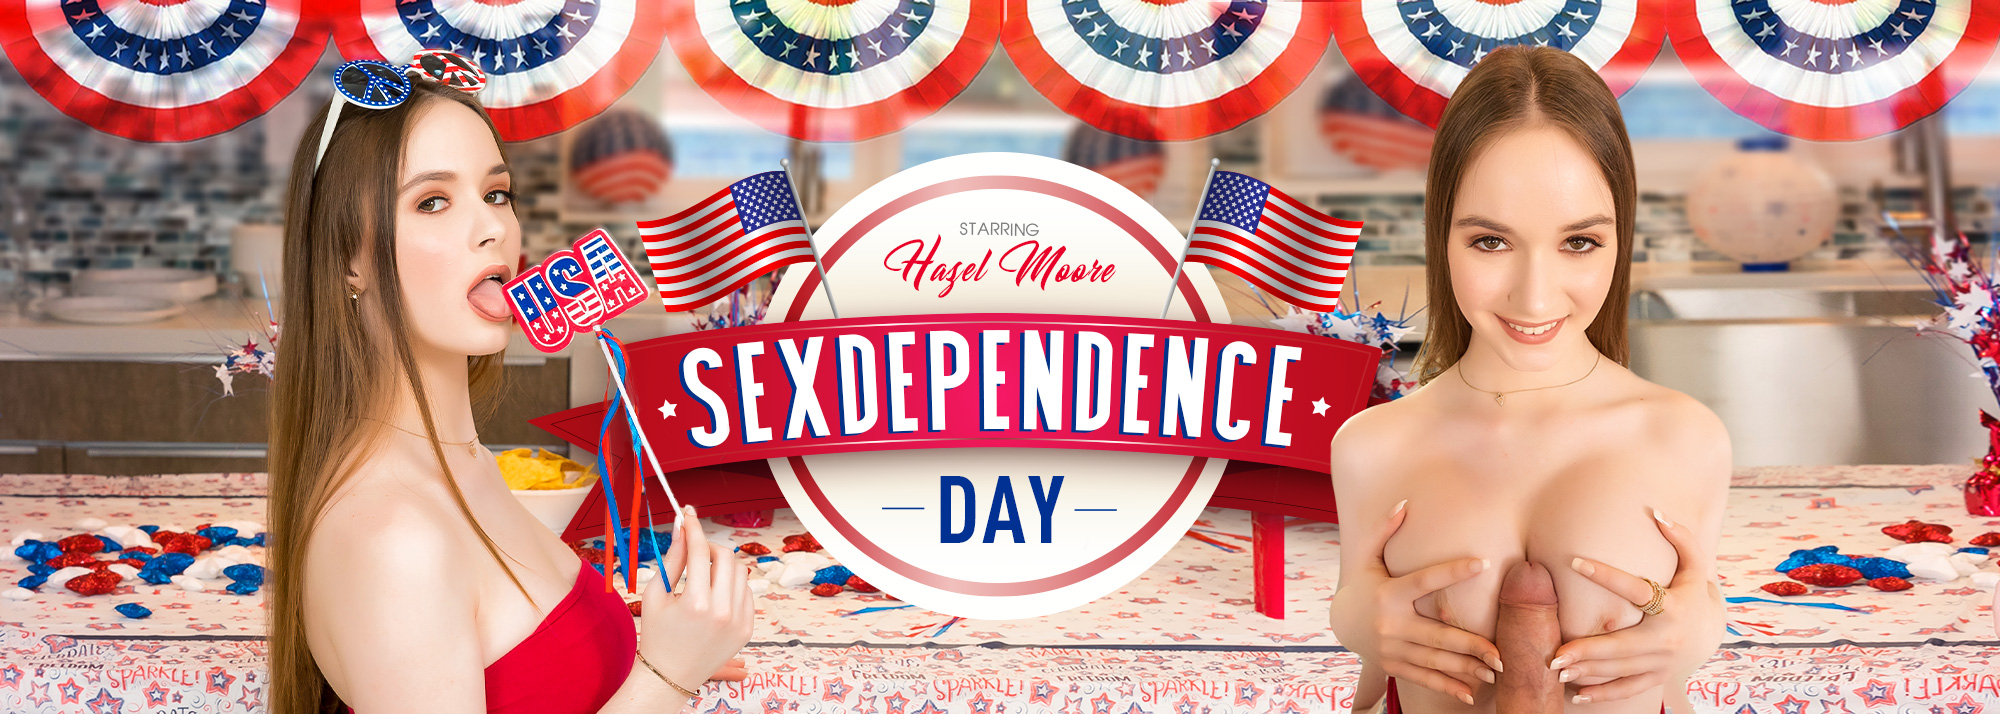 SEXdependence Day - VR Porn Video, Starring: Hazel Moore